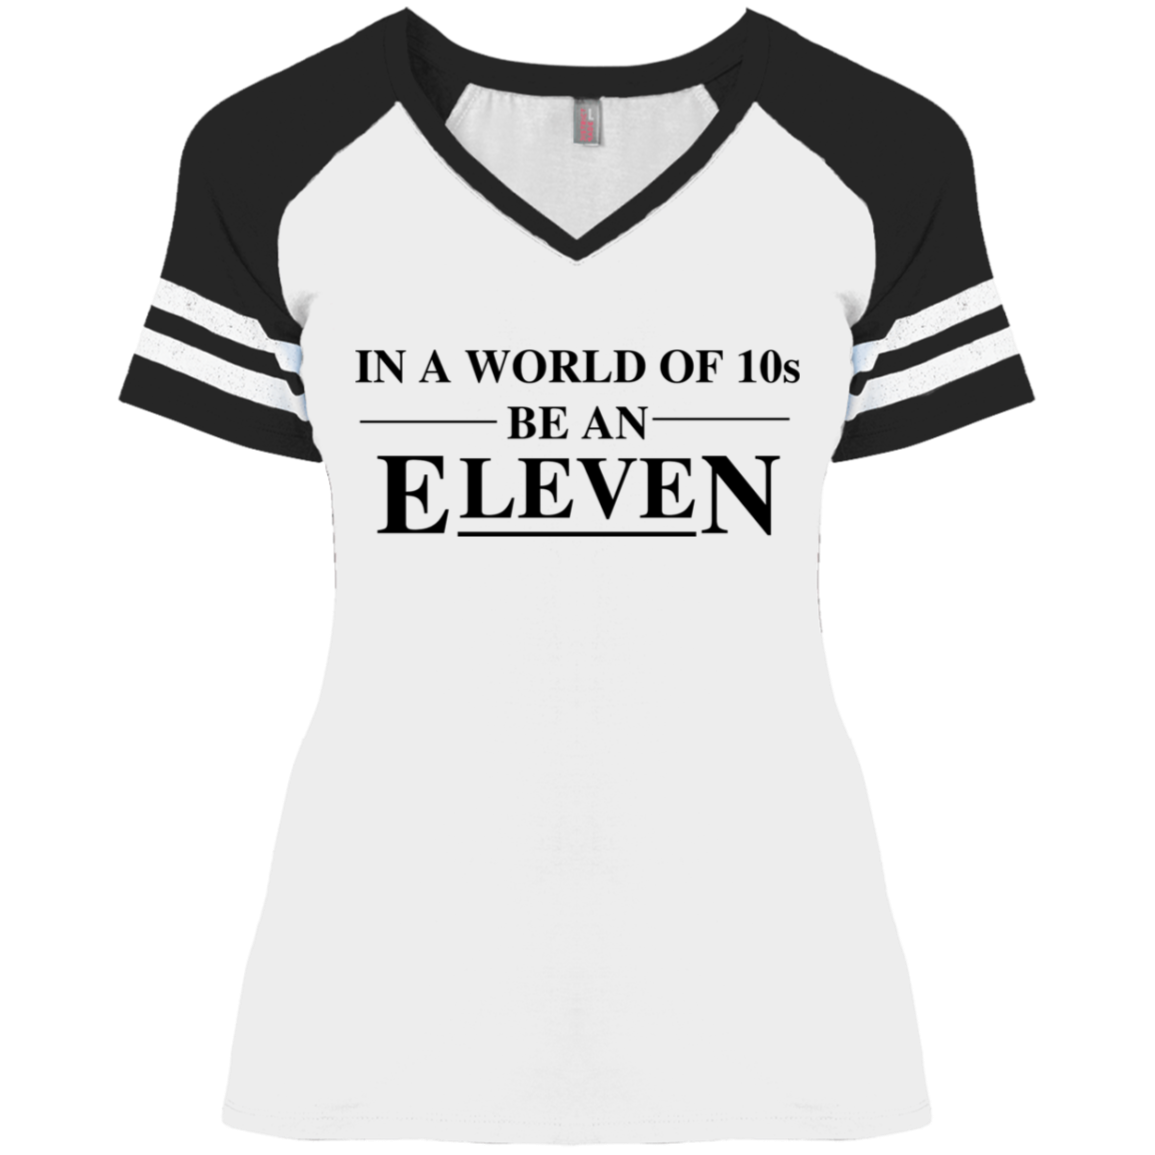 Be An Eleven - DM476 Ladies' Game V-Neck T-Shirt